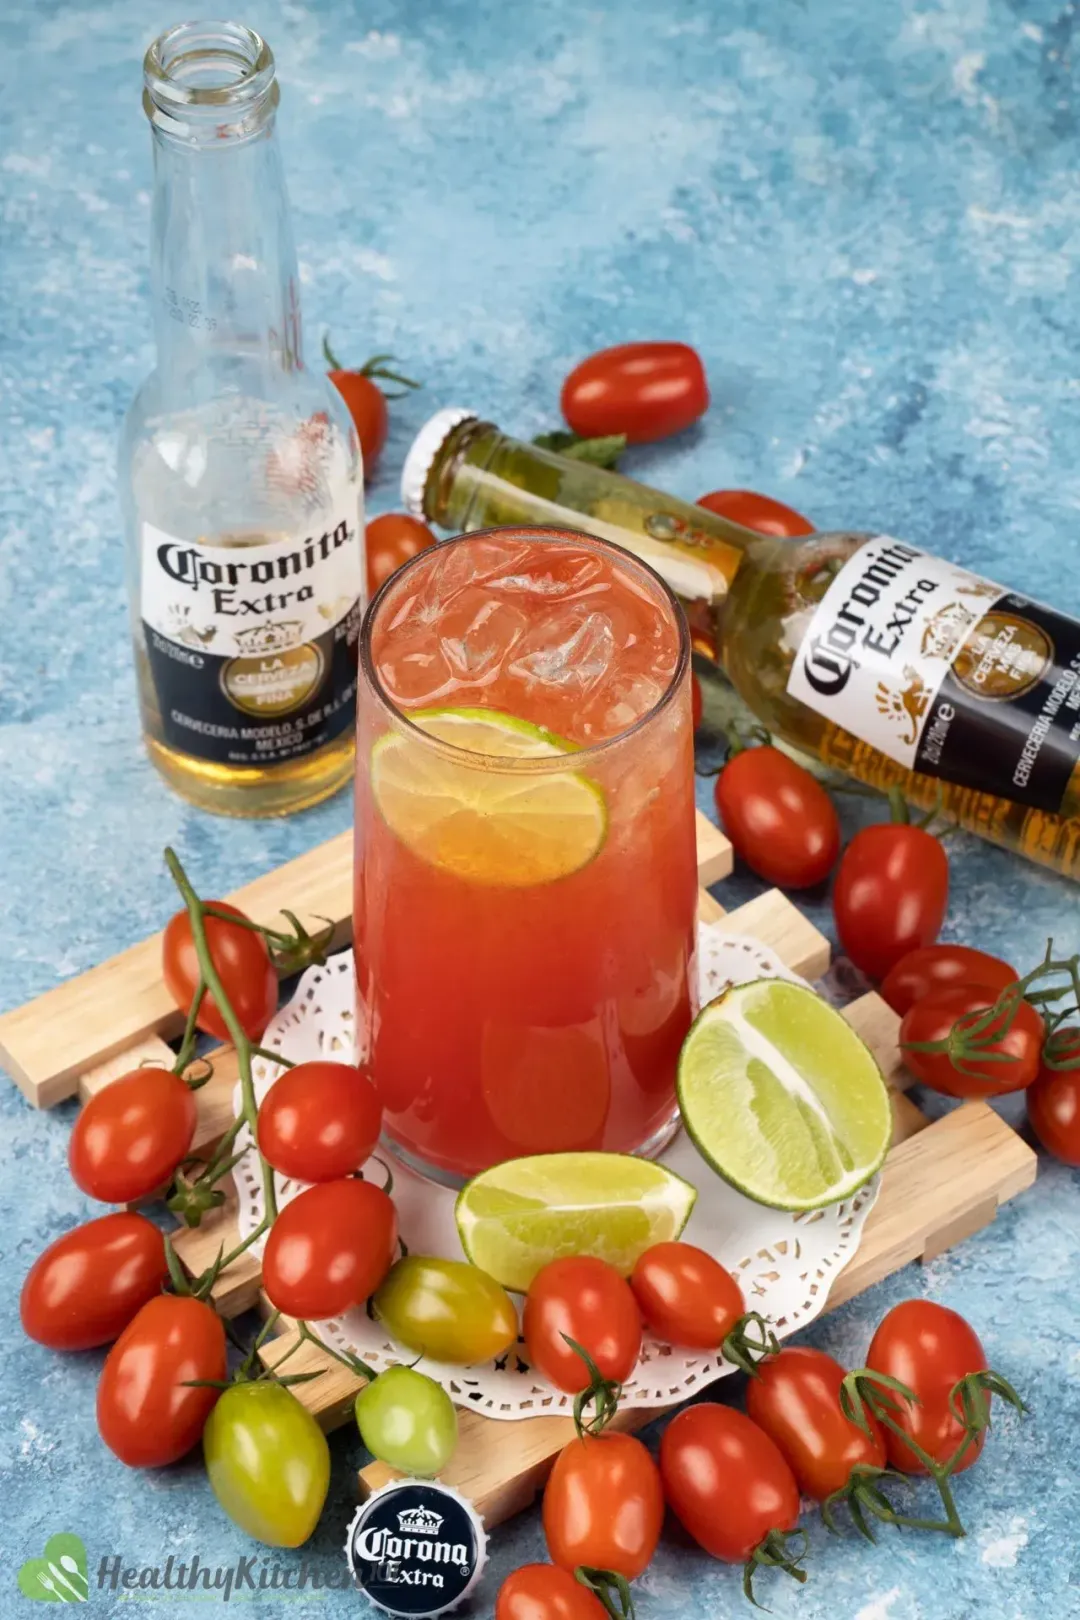 A glass of beer tomato cocktail surrounded by cherry tomatoes, halved limes, and beer bottles